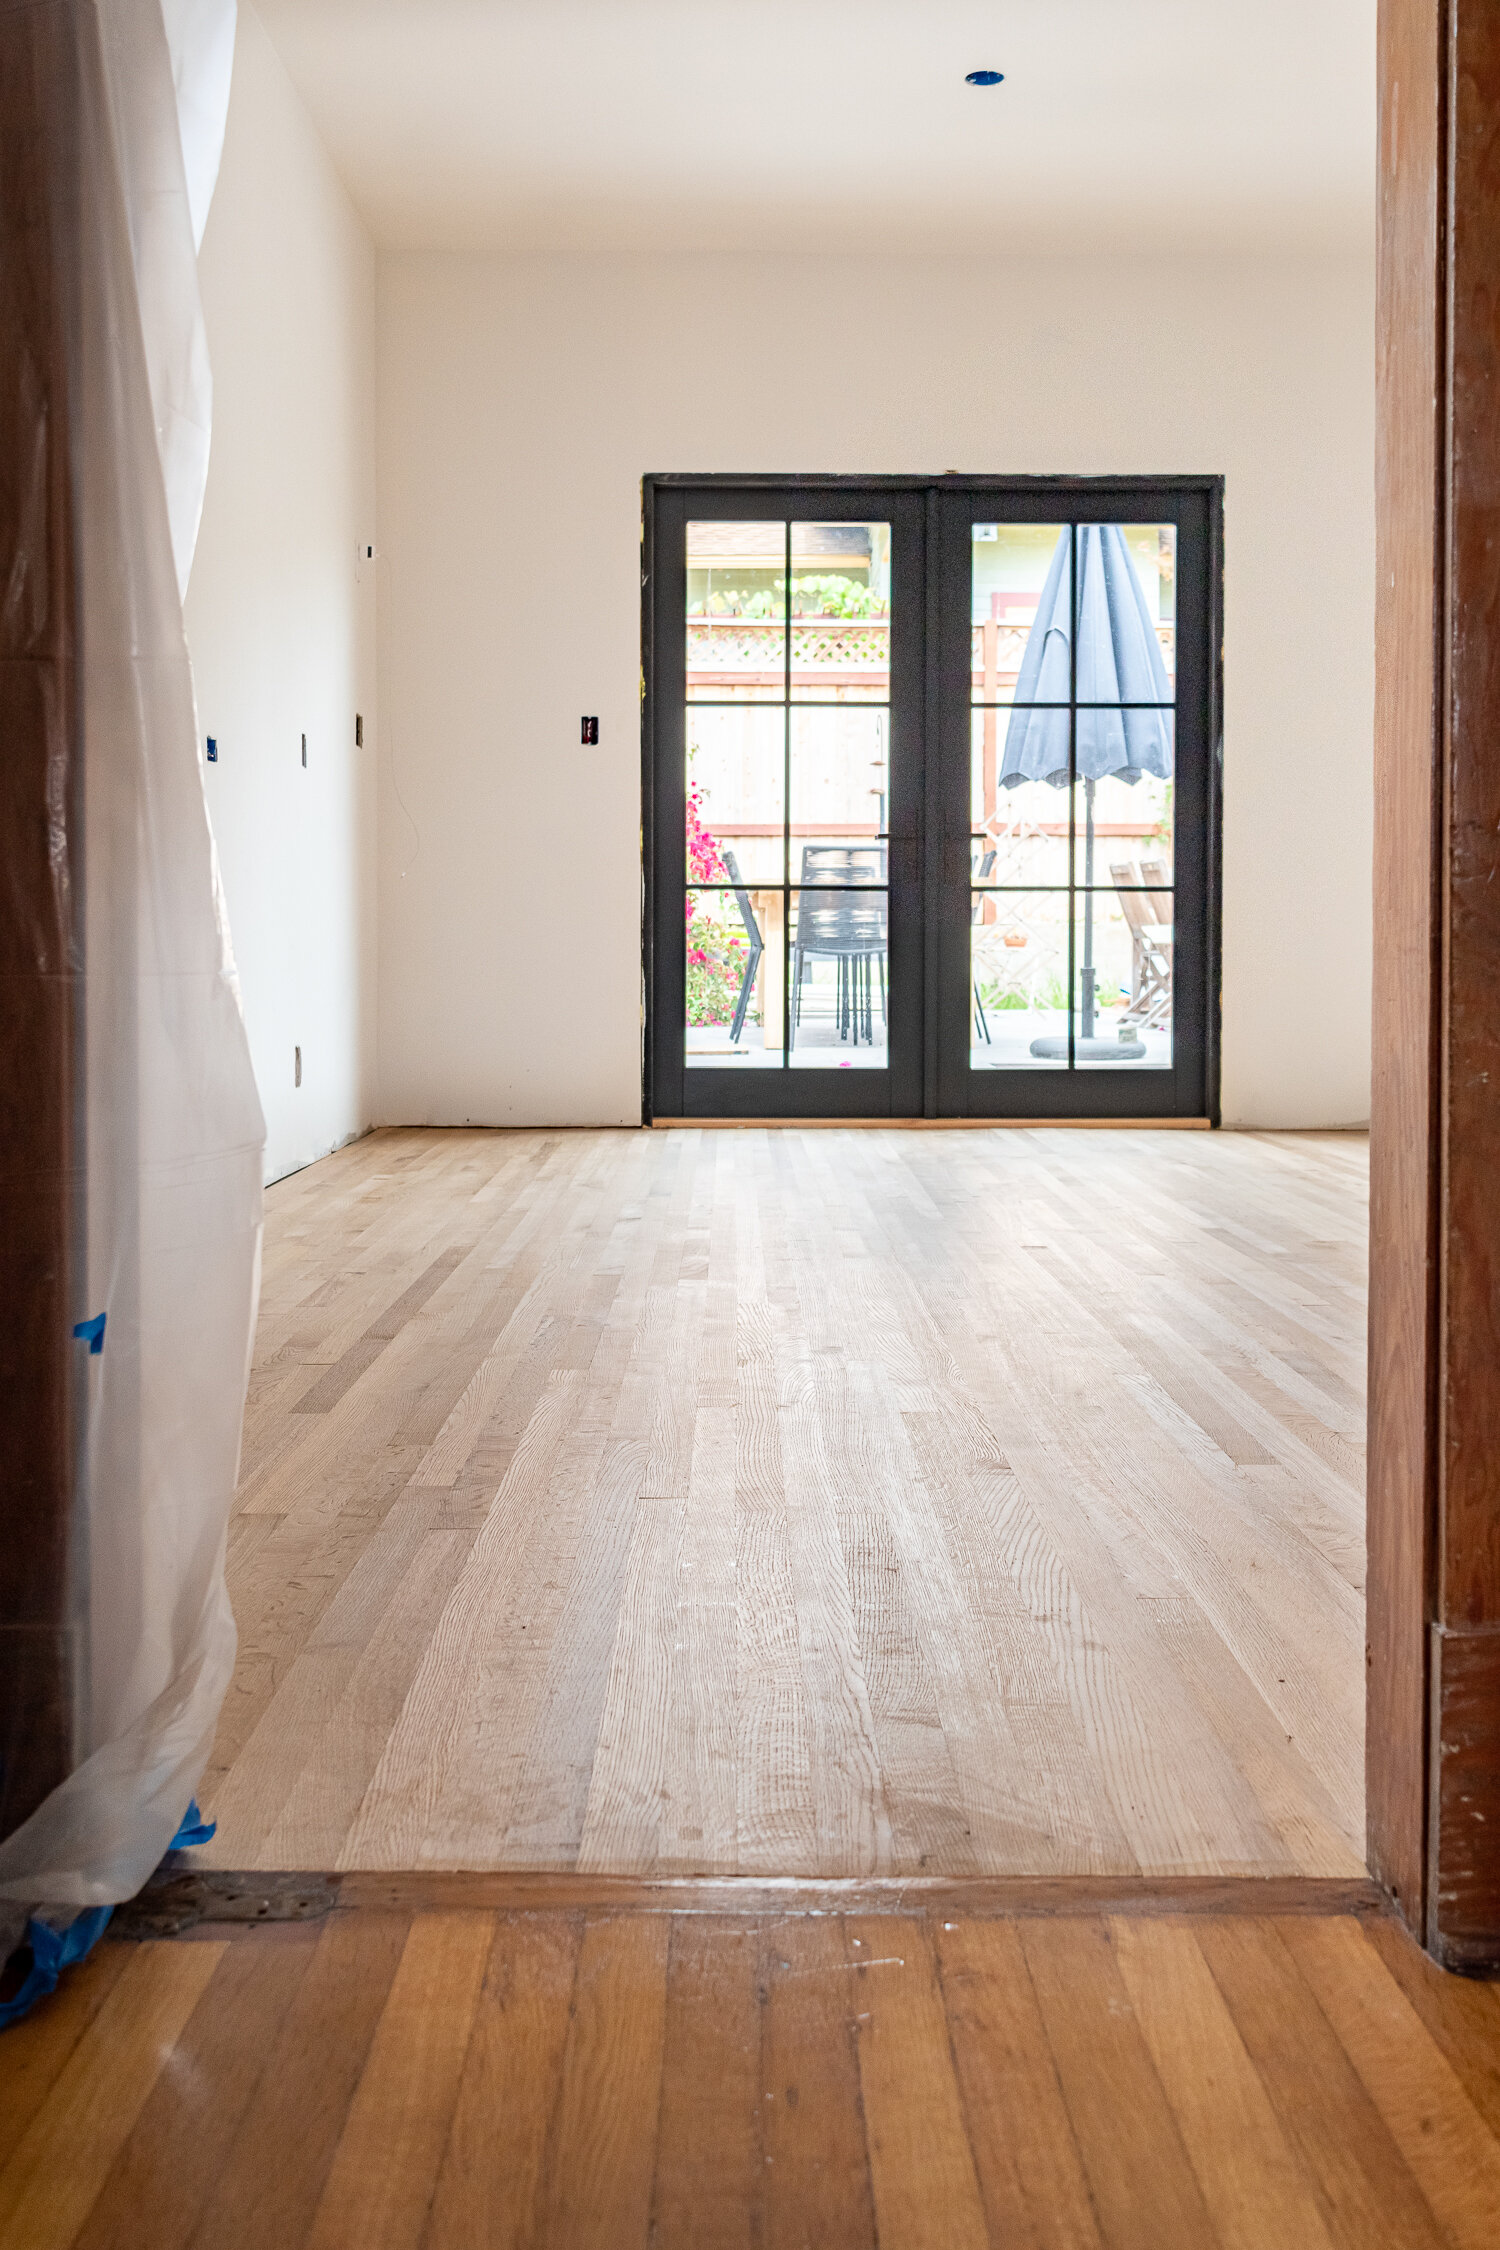 Installing New Hardwood Floors In Our, Installing Hardwood Floors Over Existing Hardwood Floors